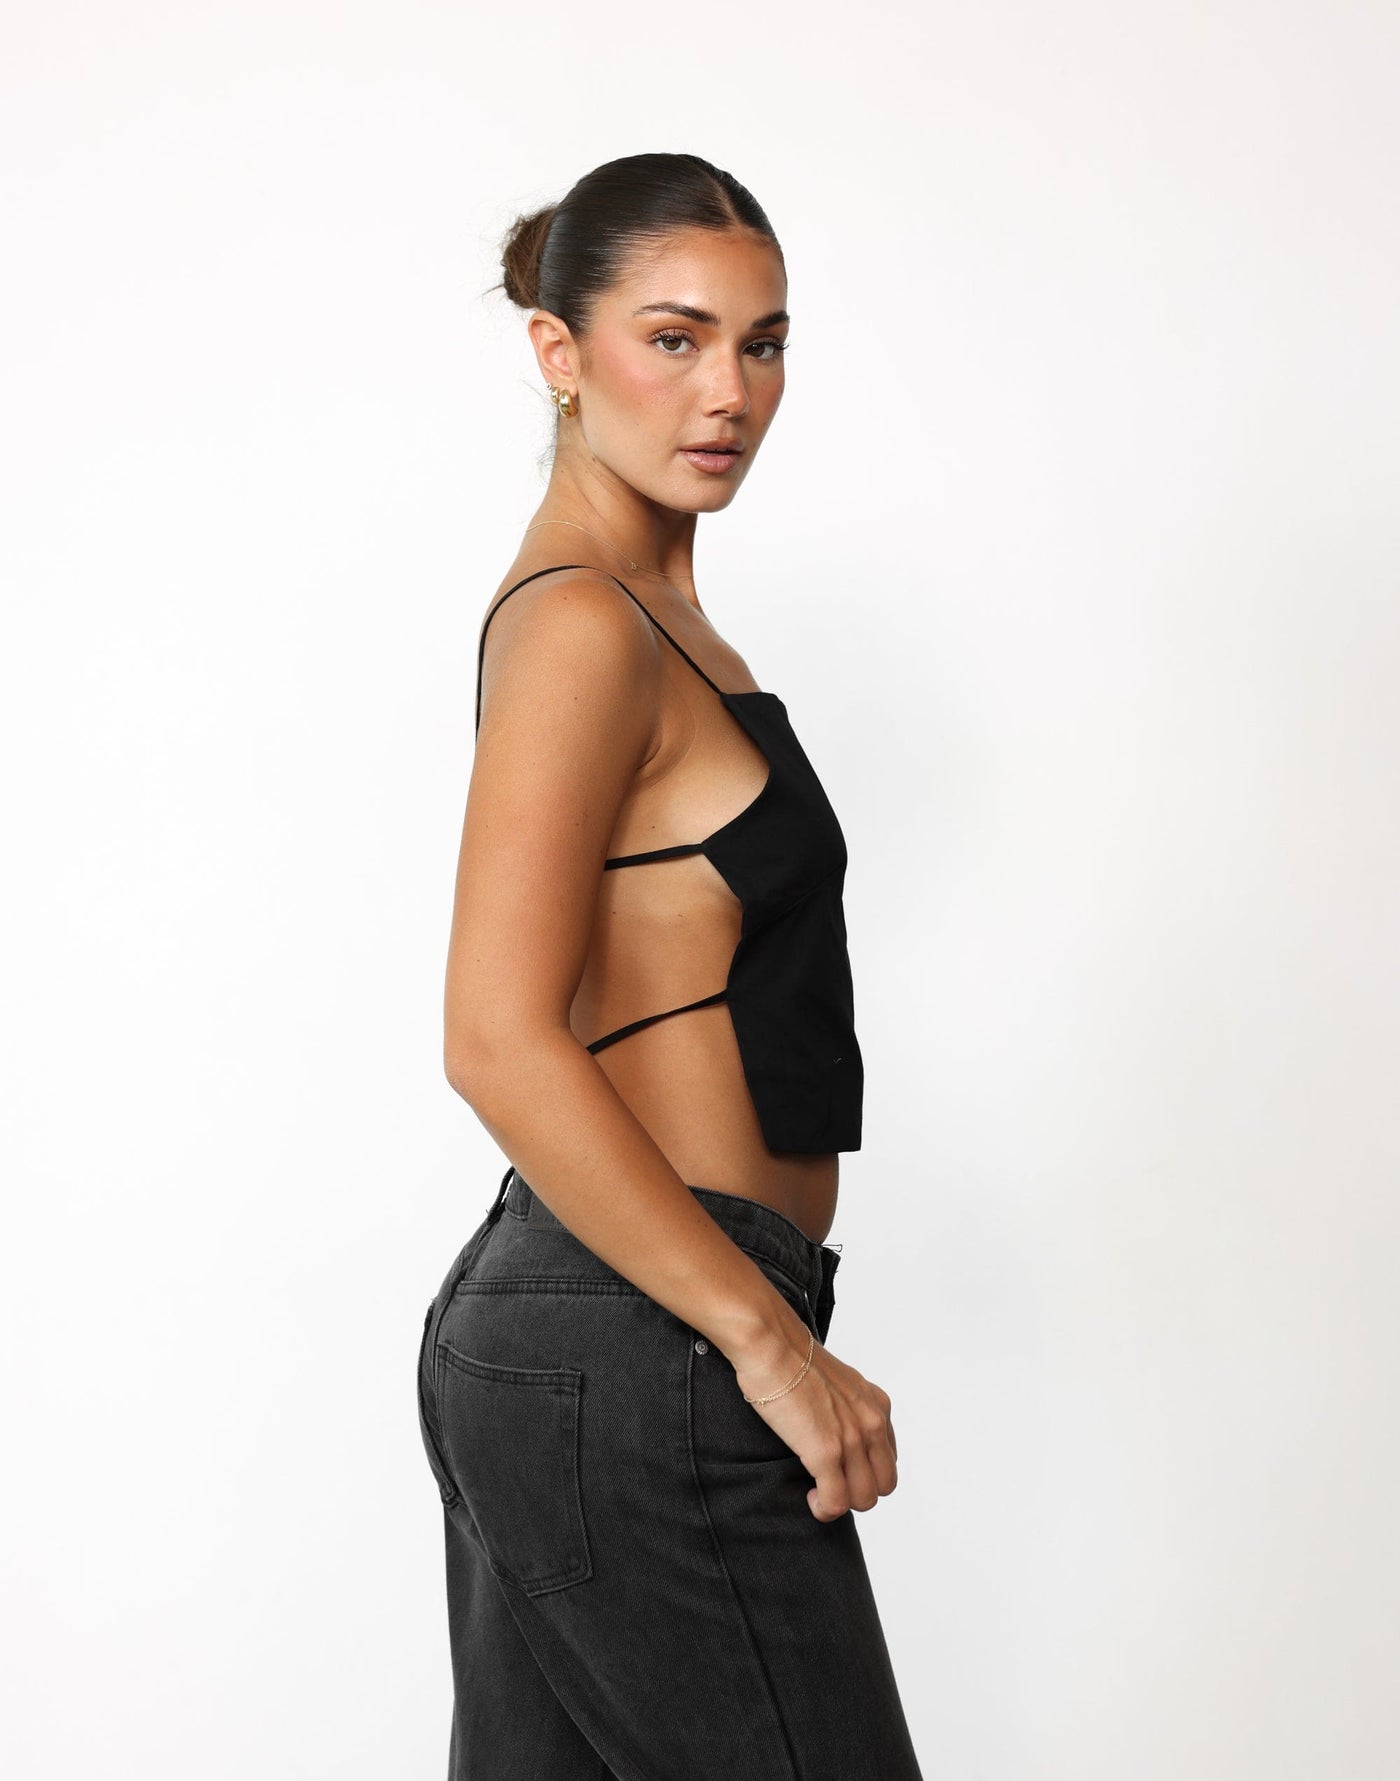 Adeola Top (Black) - Asymmetrical Neckline Backless Top - Women's Top - Charcoal Clothing